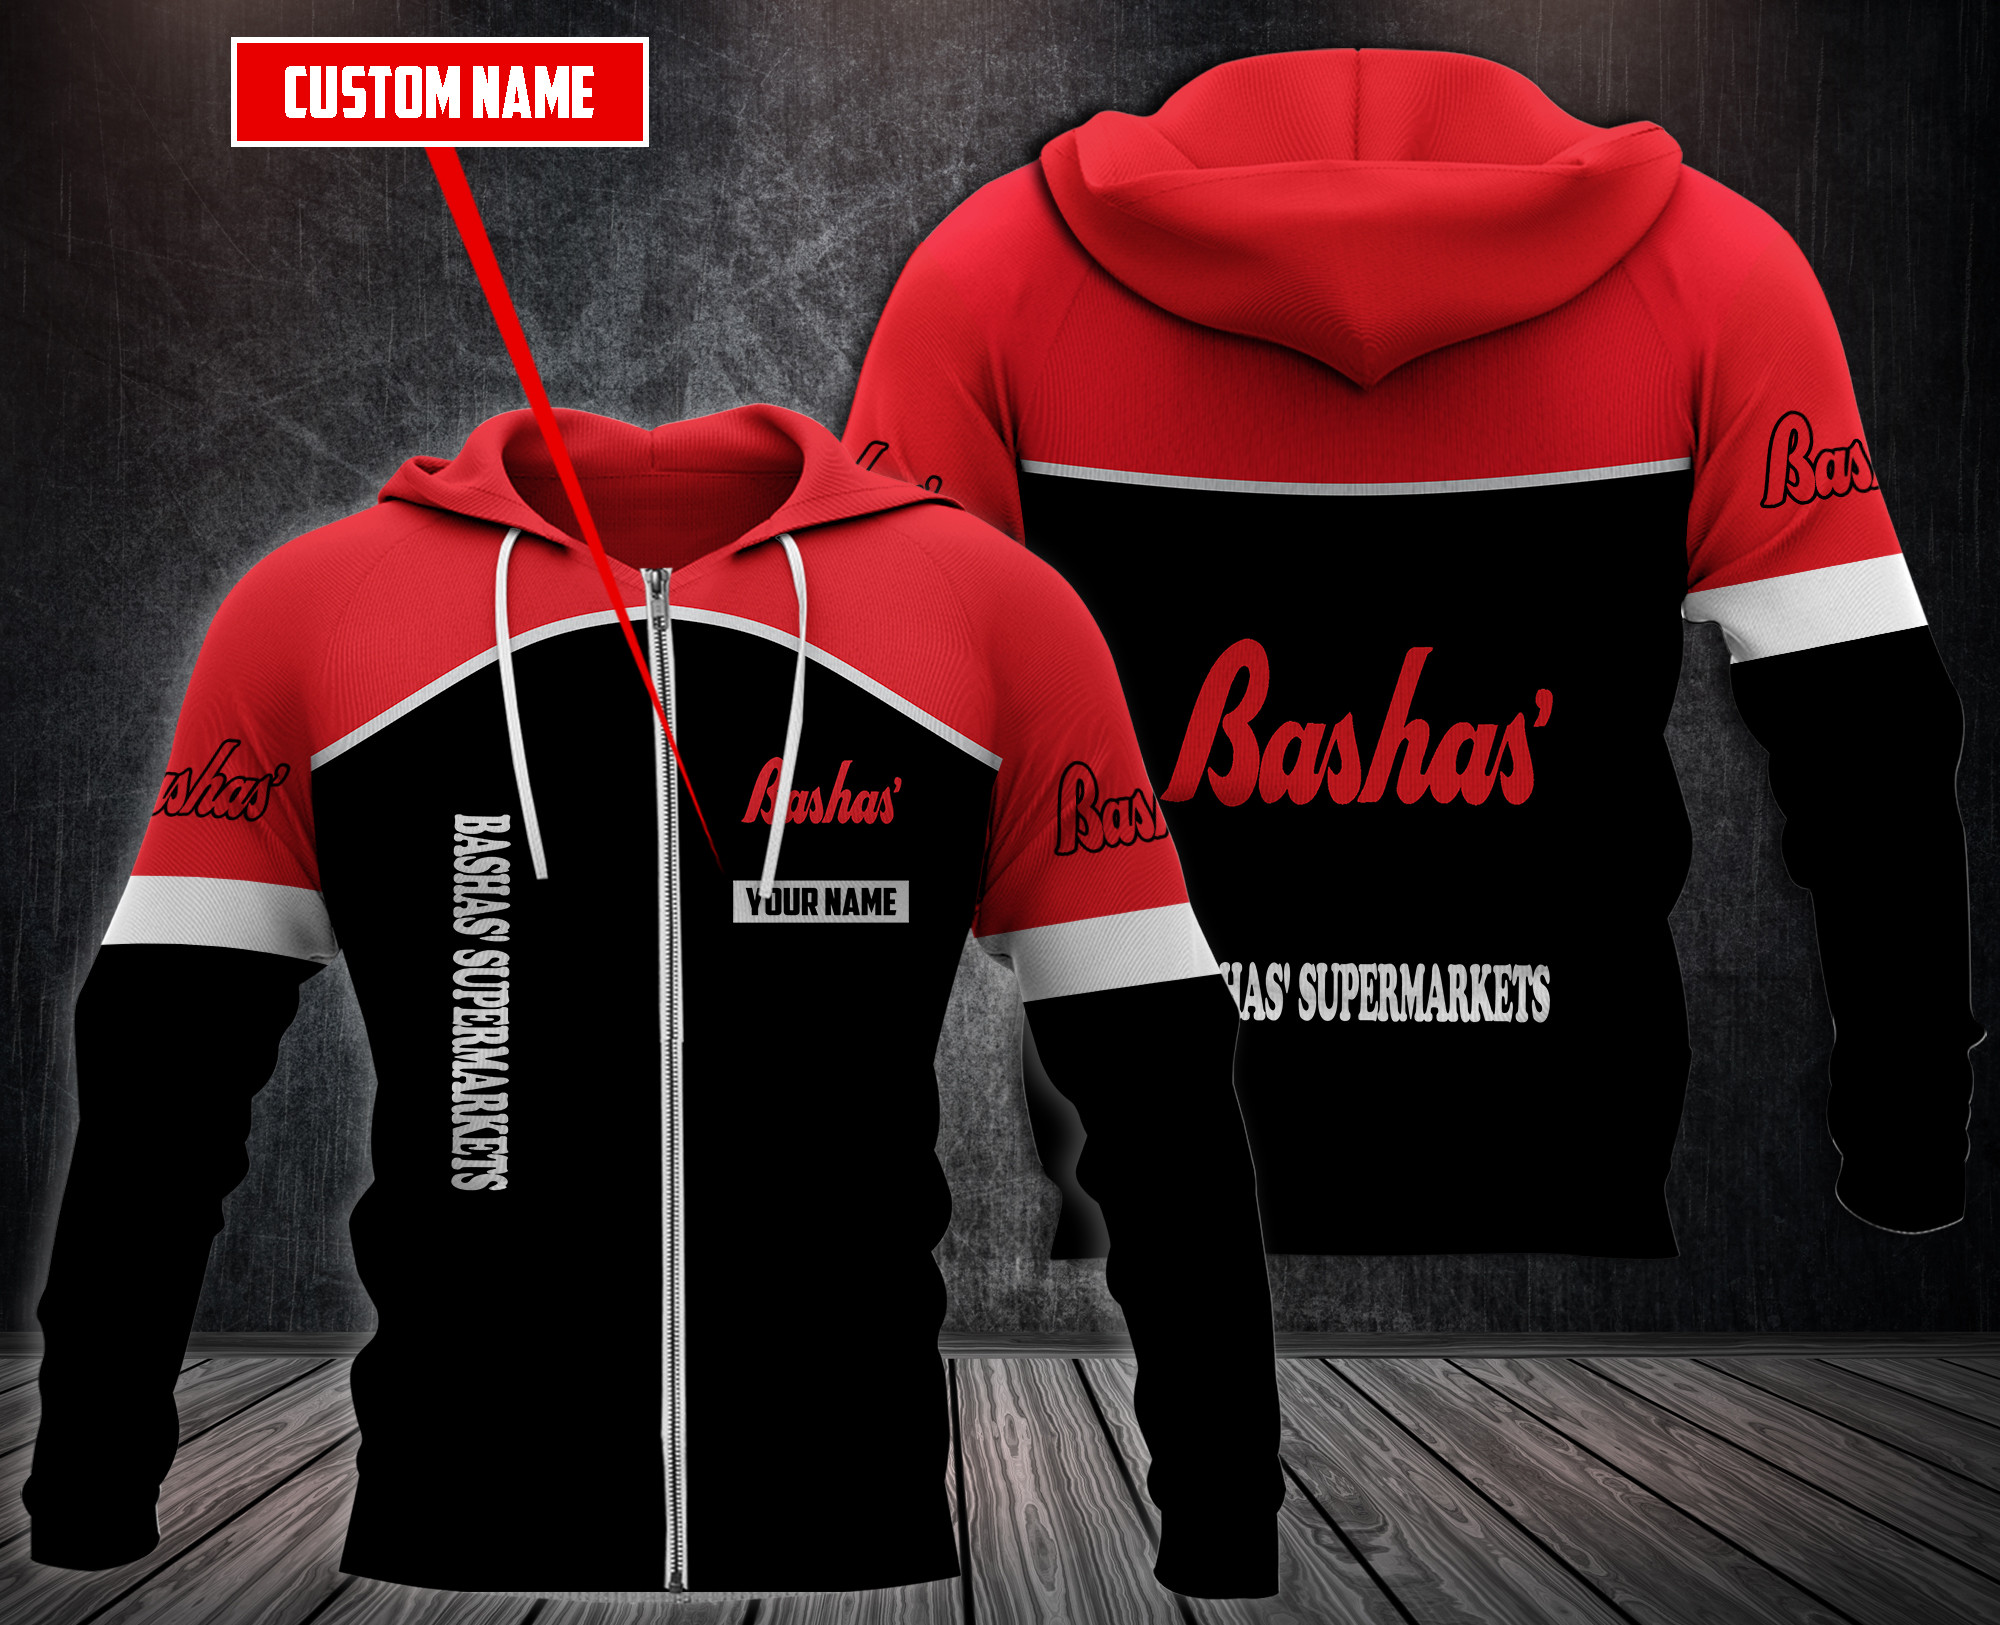 Choose the right hoodies for you on our boxboxshirt and ethershirt websites in 2022 66